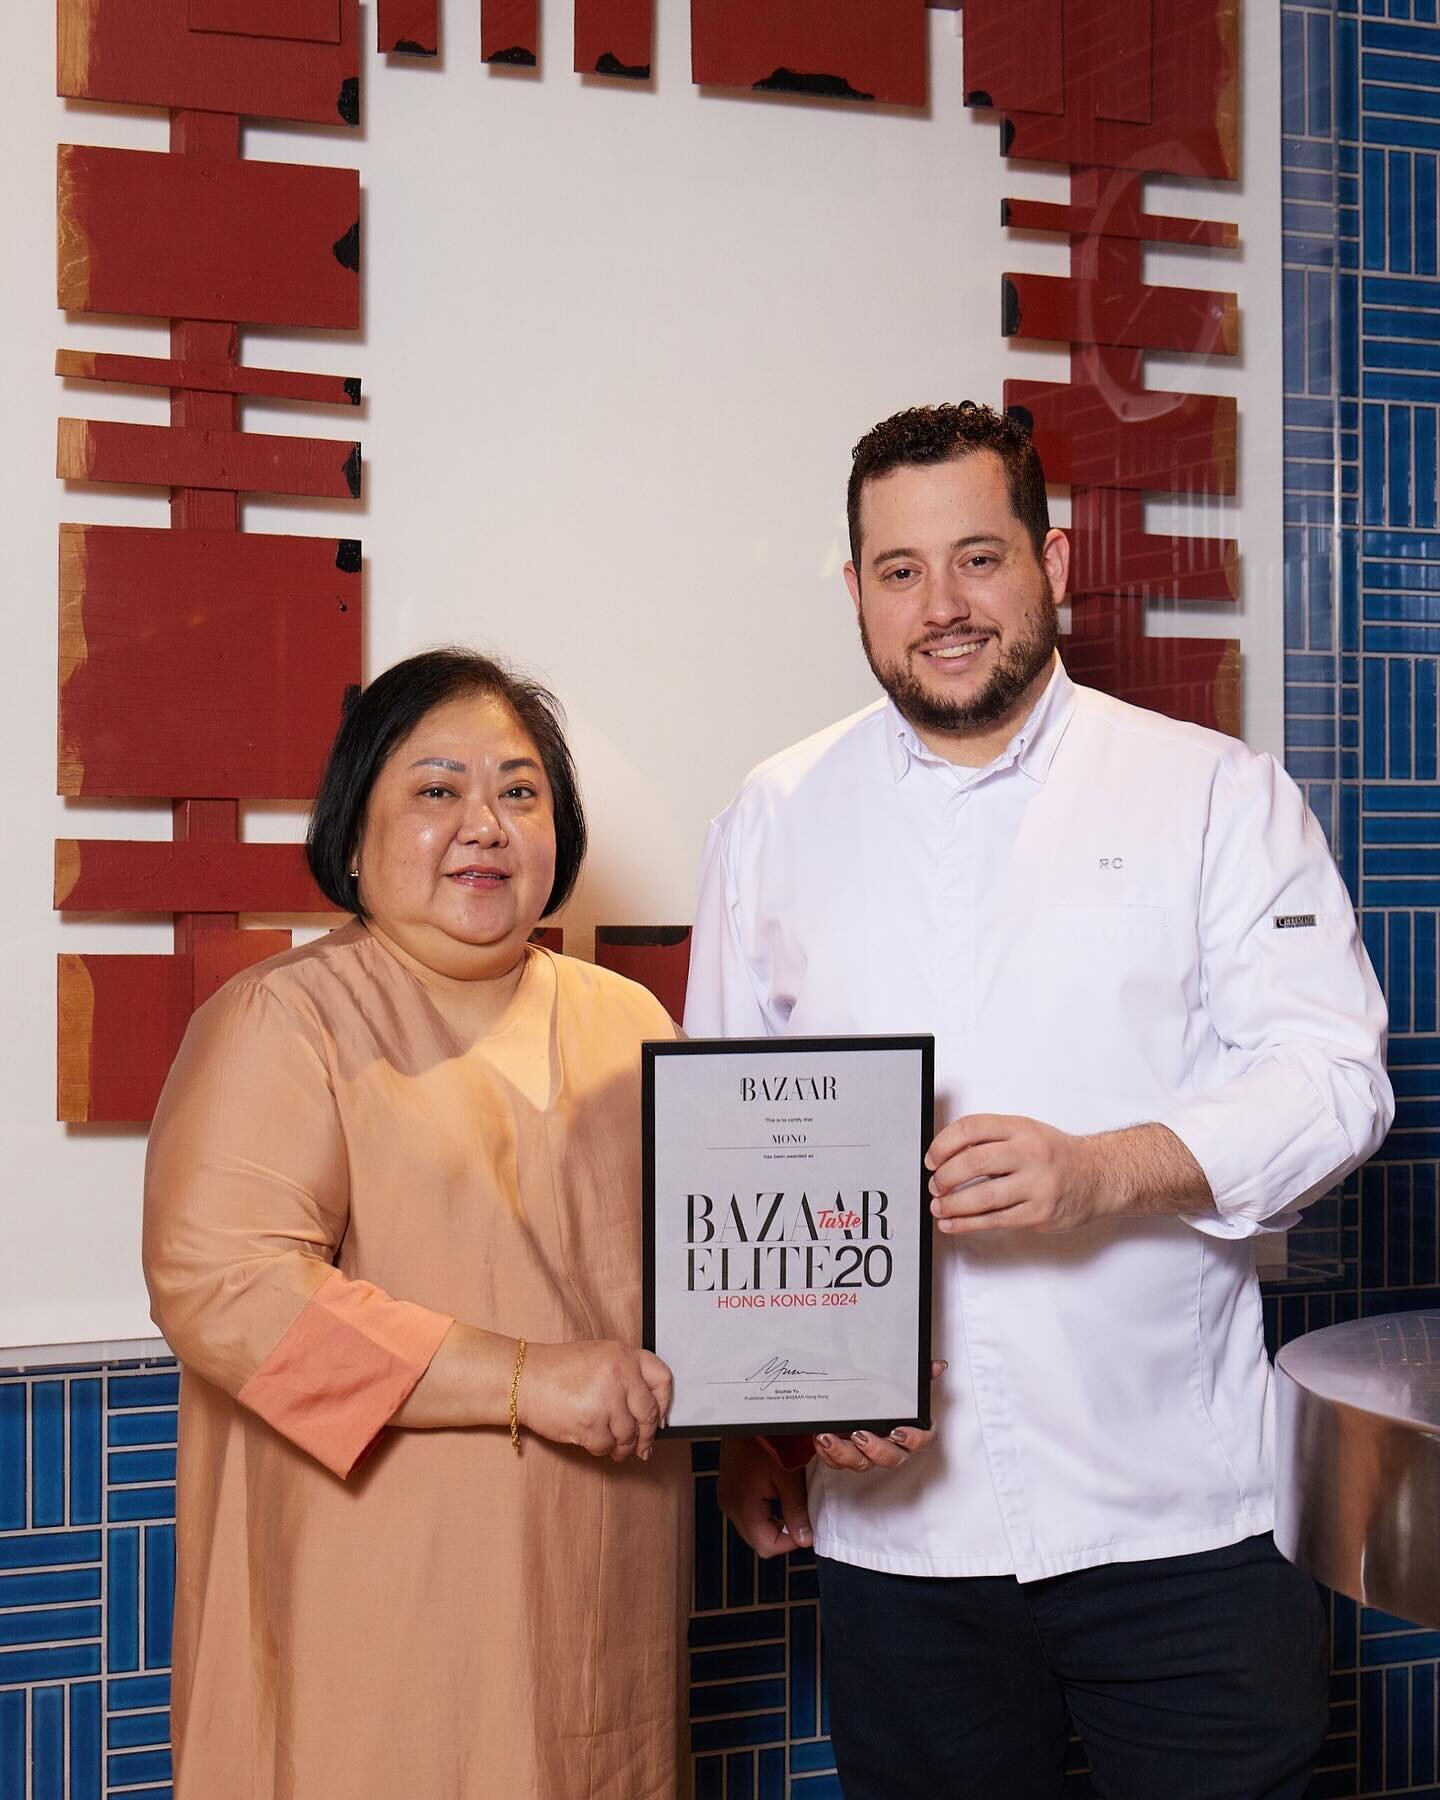 We are thrilled to have been named one of the top 20 restaurants in Hong Kong on The BAZAAR Taste Elite 20 (Hong Kong) 2023 list. We extend our heartfelt thanks to the judges, our incredible team, and our loyal guests for being part of our success. W